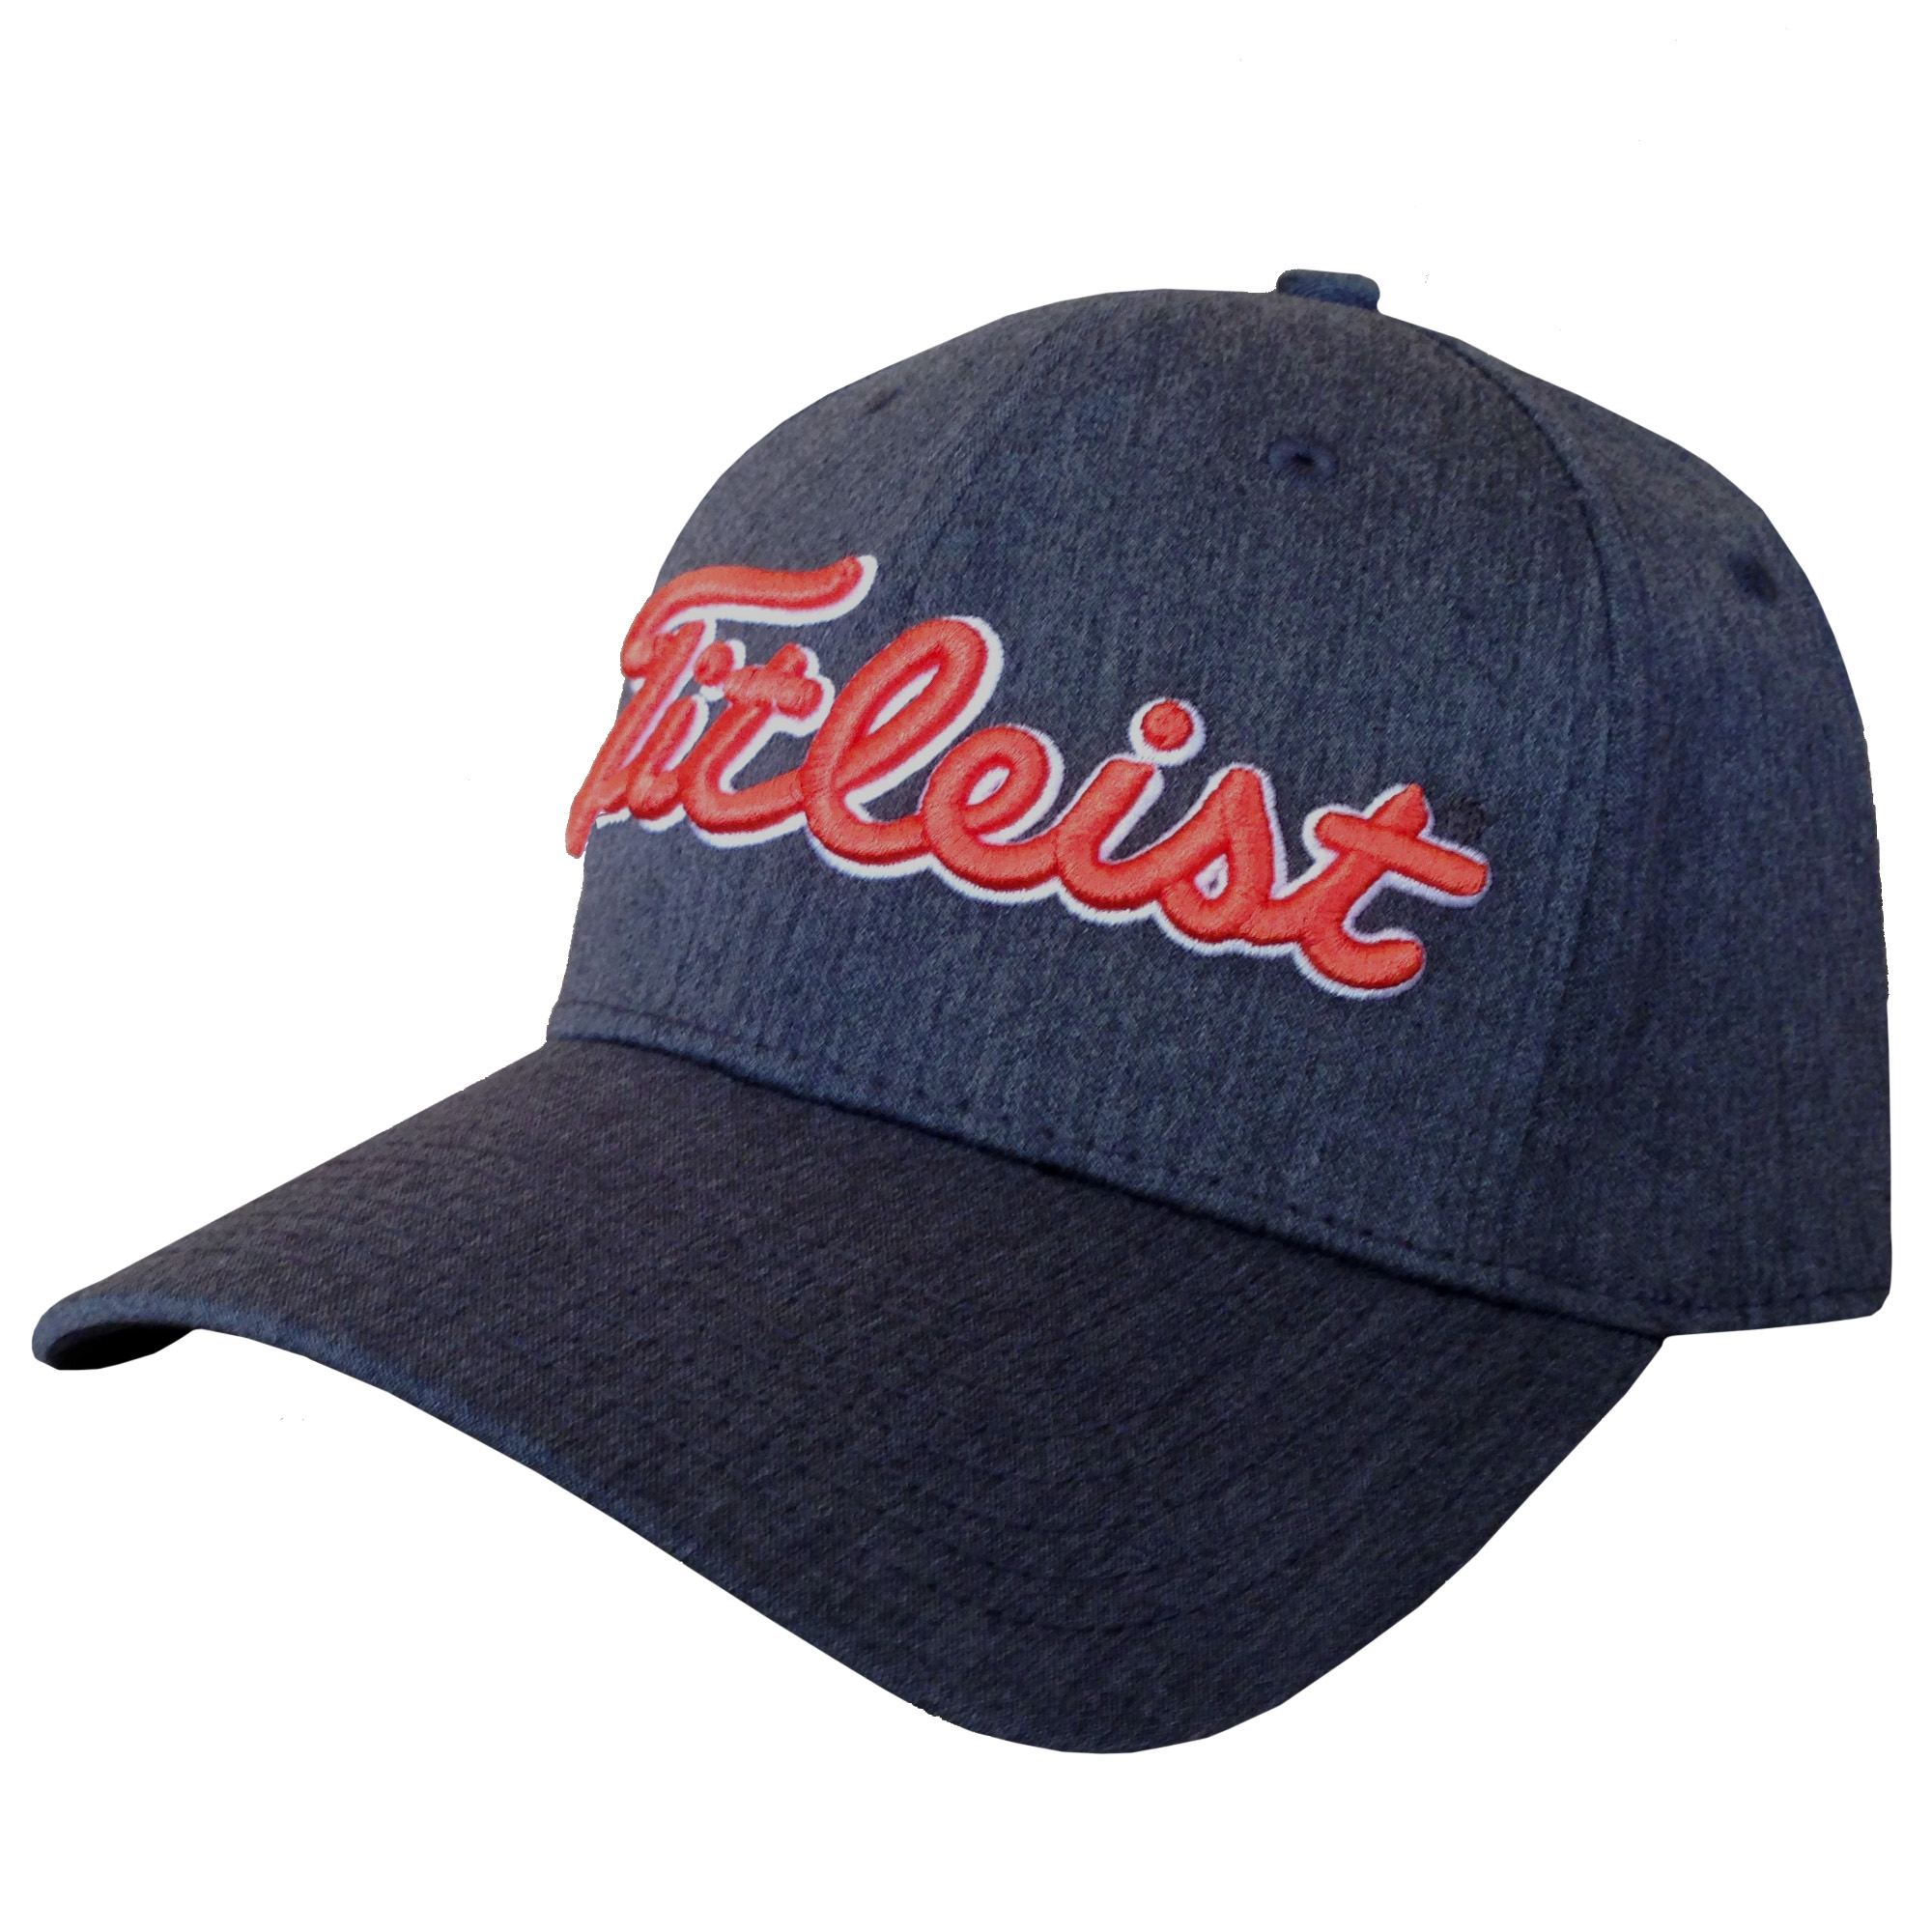 New 2015 Titleist Performance Heather Fitted Hat/Cap COLOR: Charcoal ...